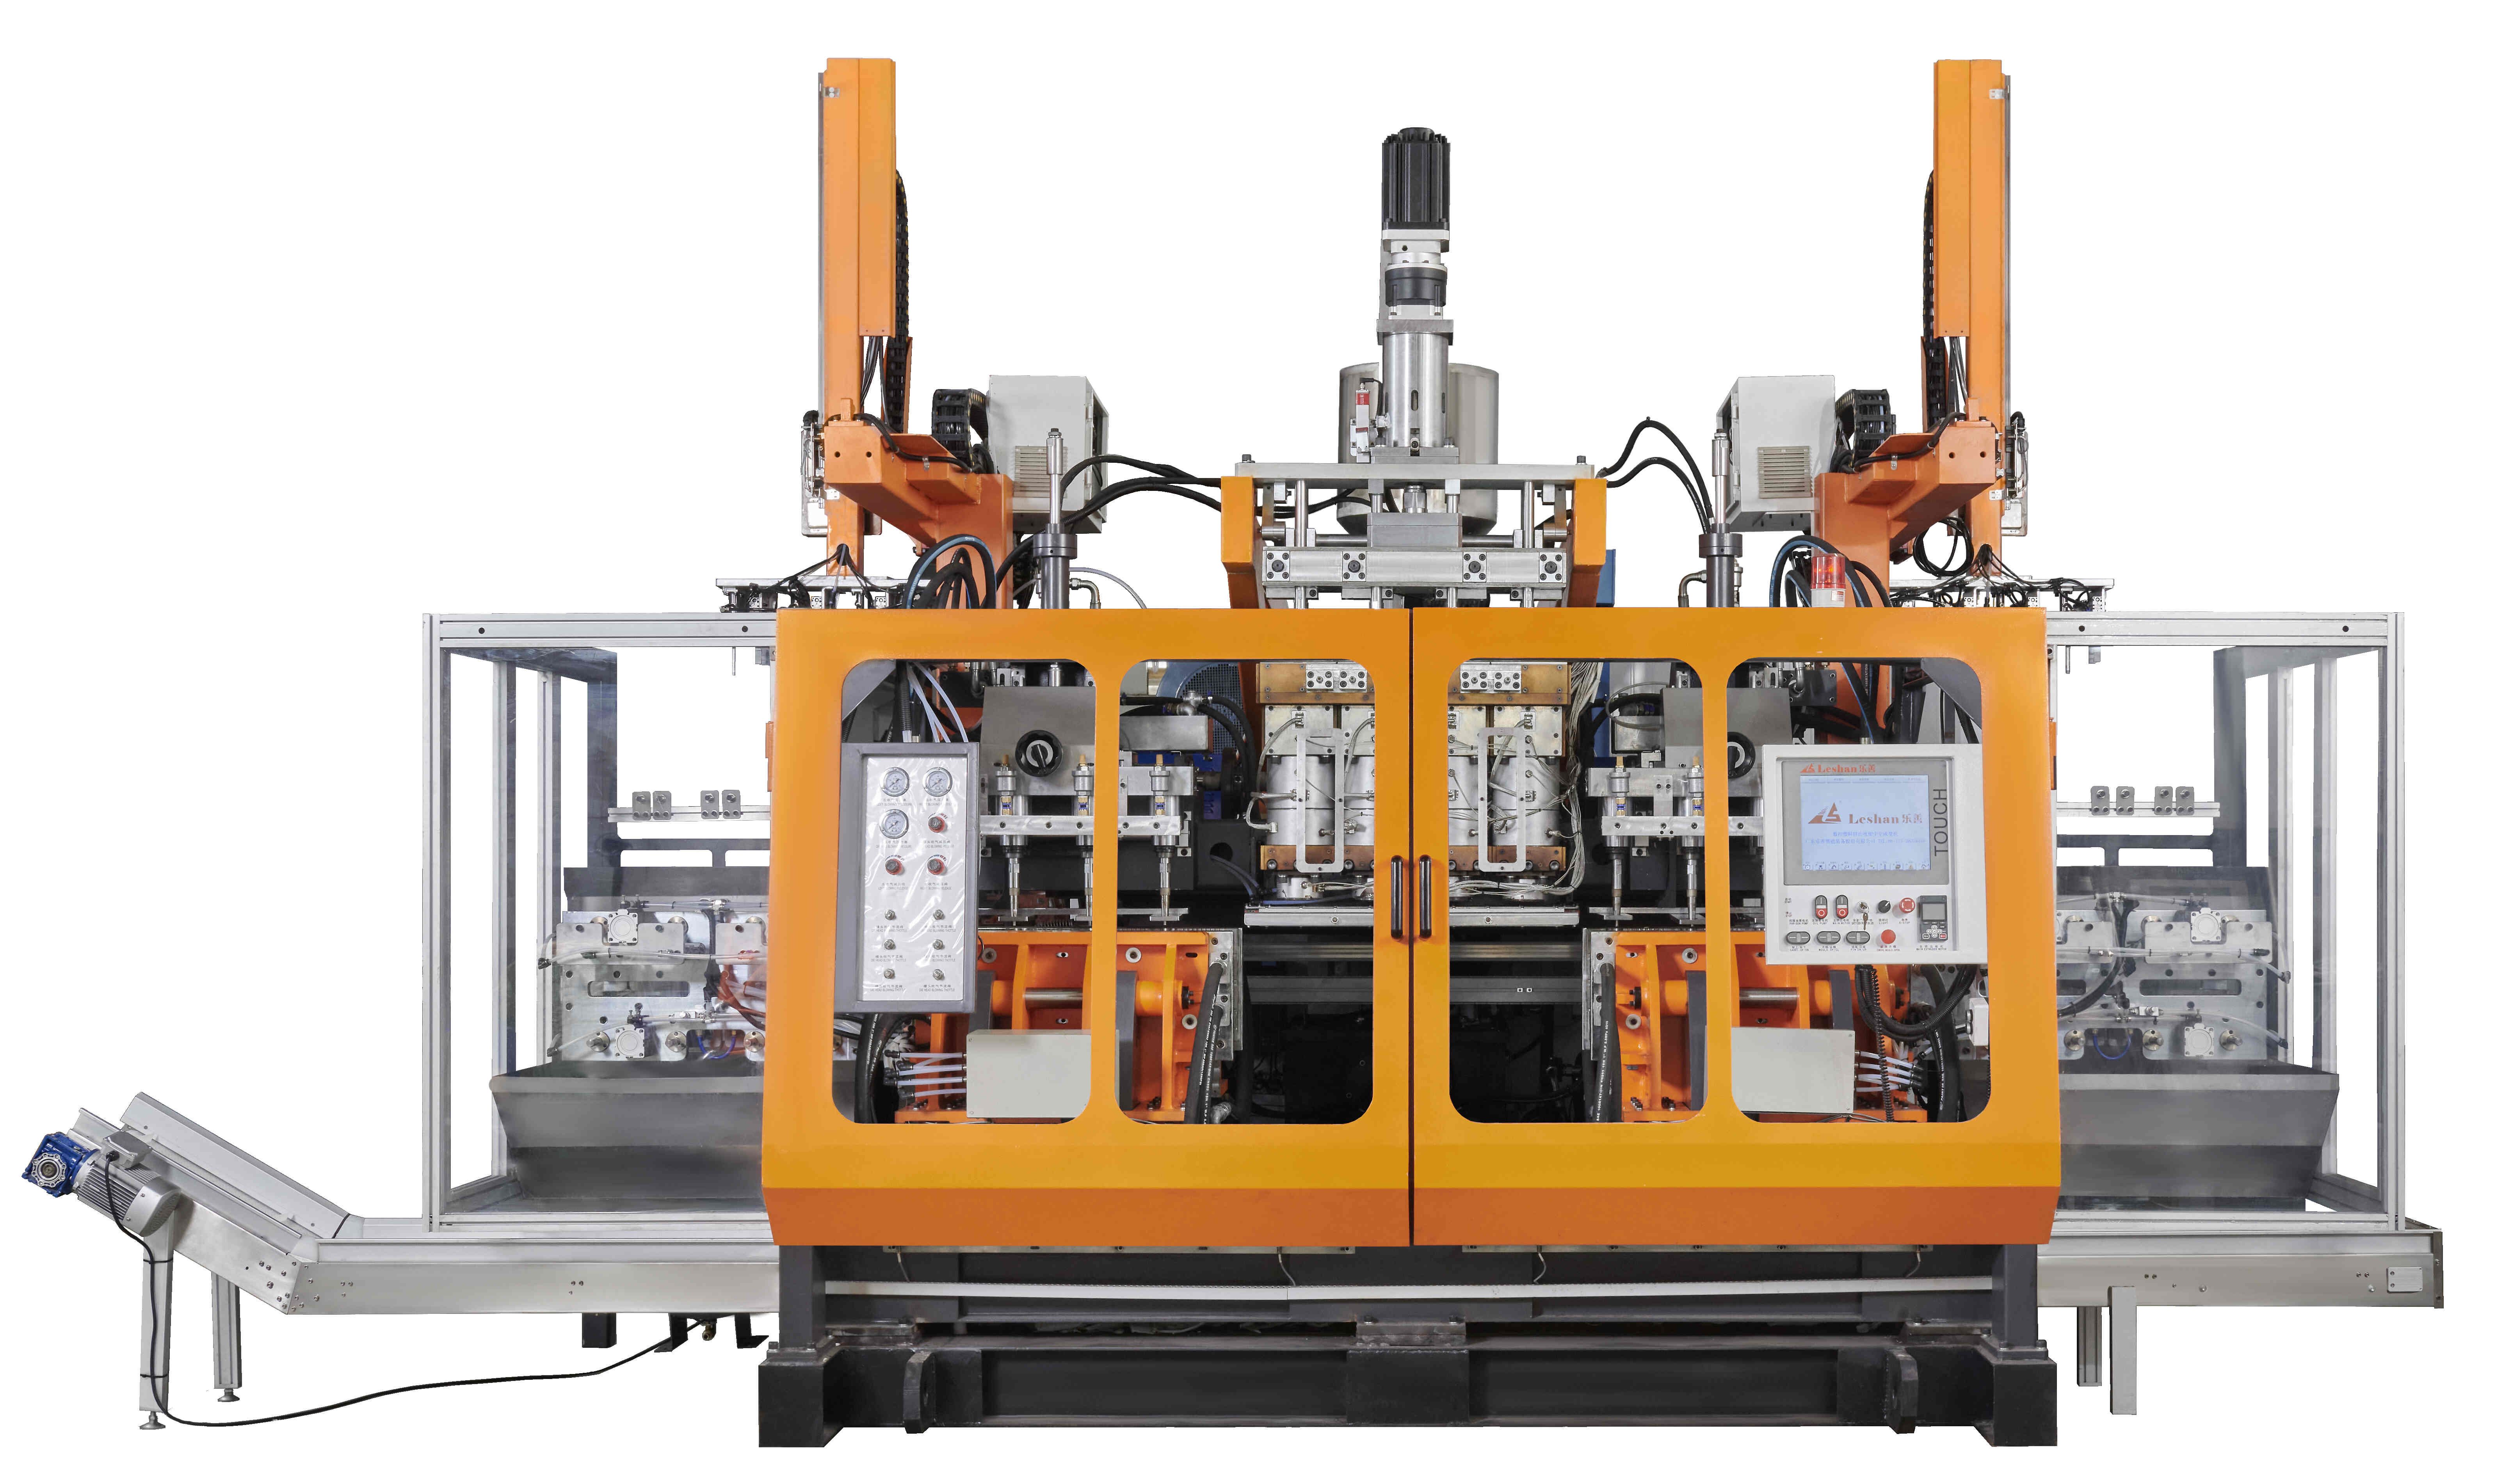 What is the operating cost of a 1l blow molding machine?